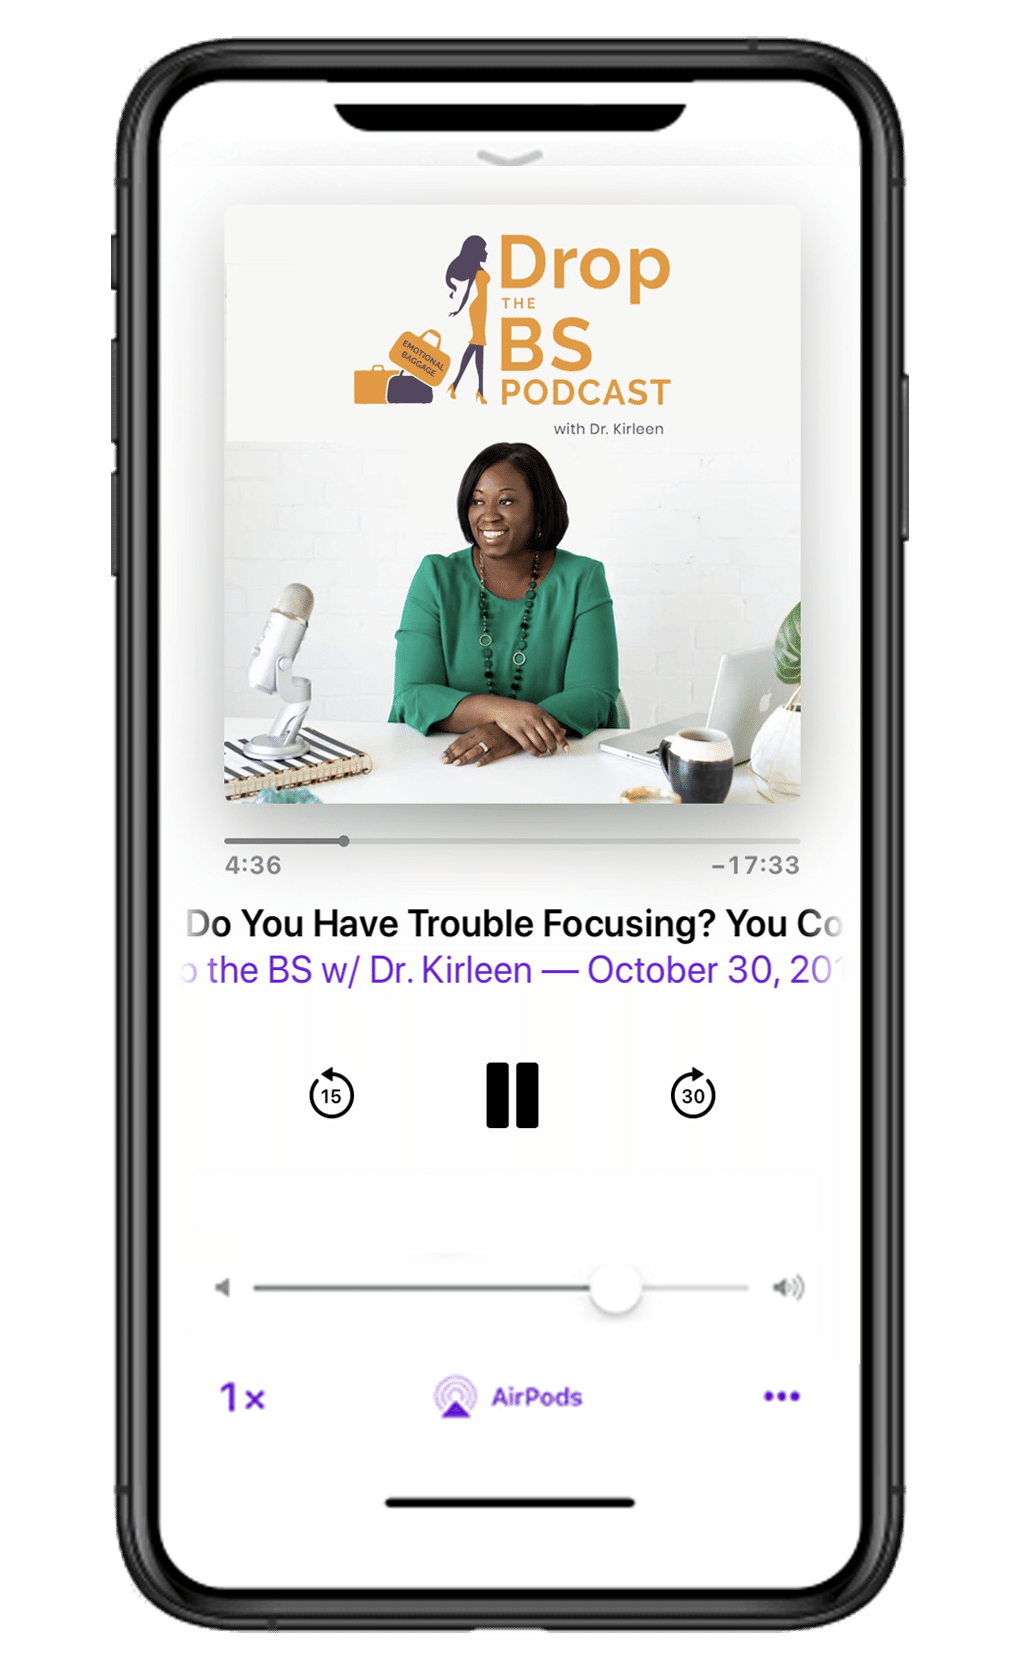 THE DROP THE BS PODCAST with Dr. Kirleen